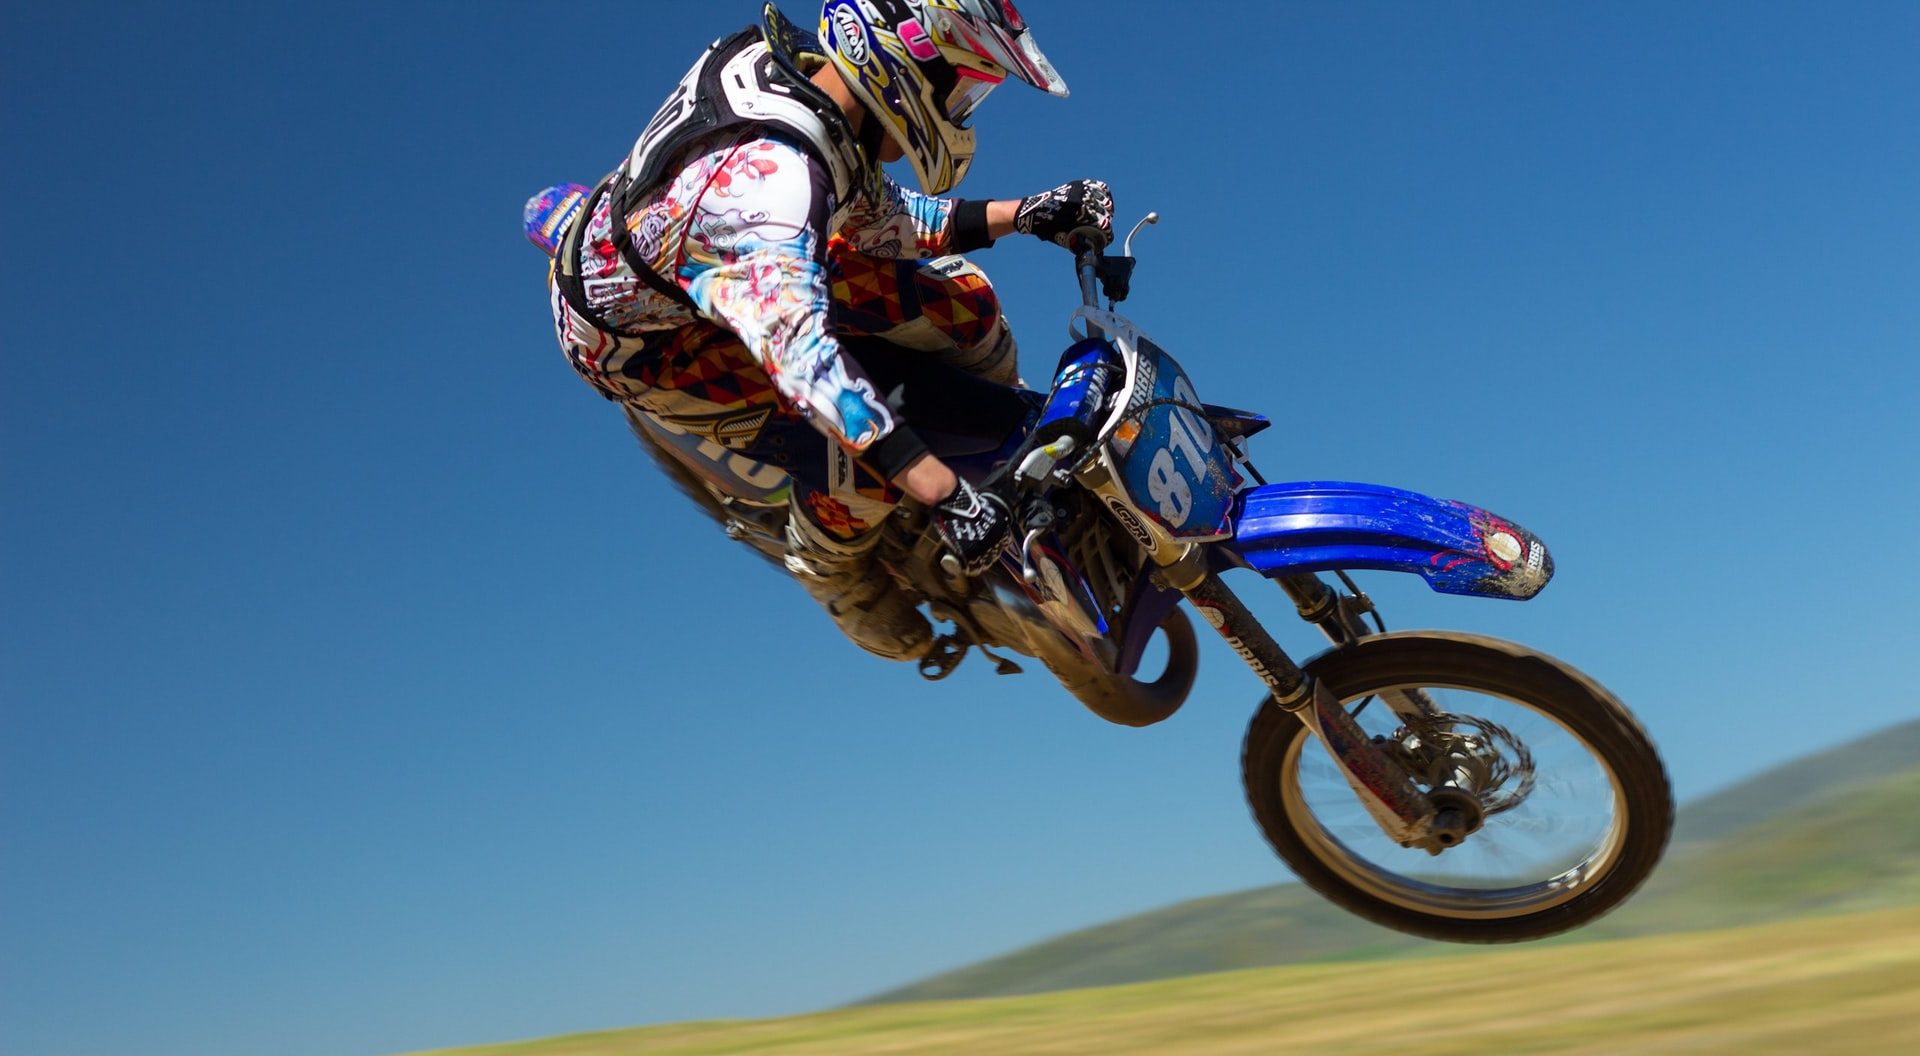 How Fast Does a 200CC Dirt Bike Go?